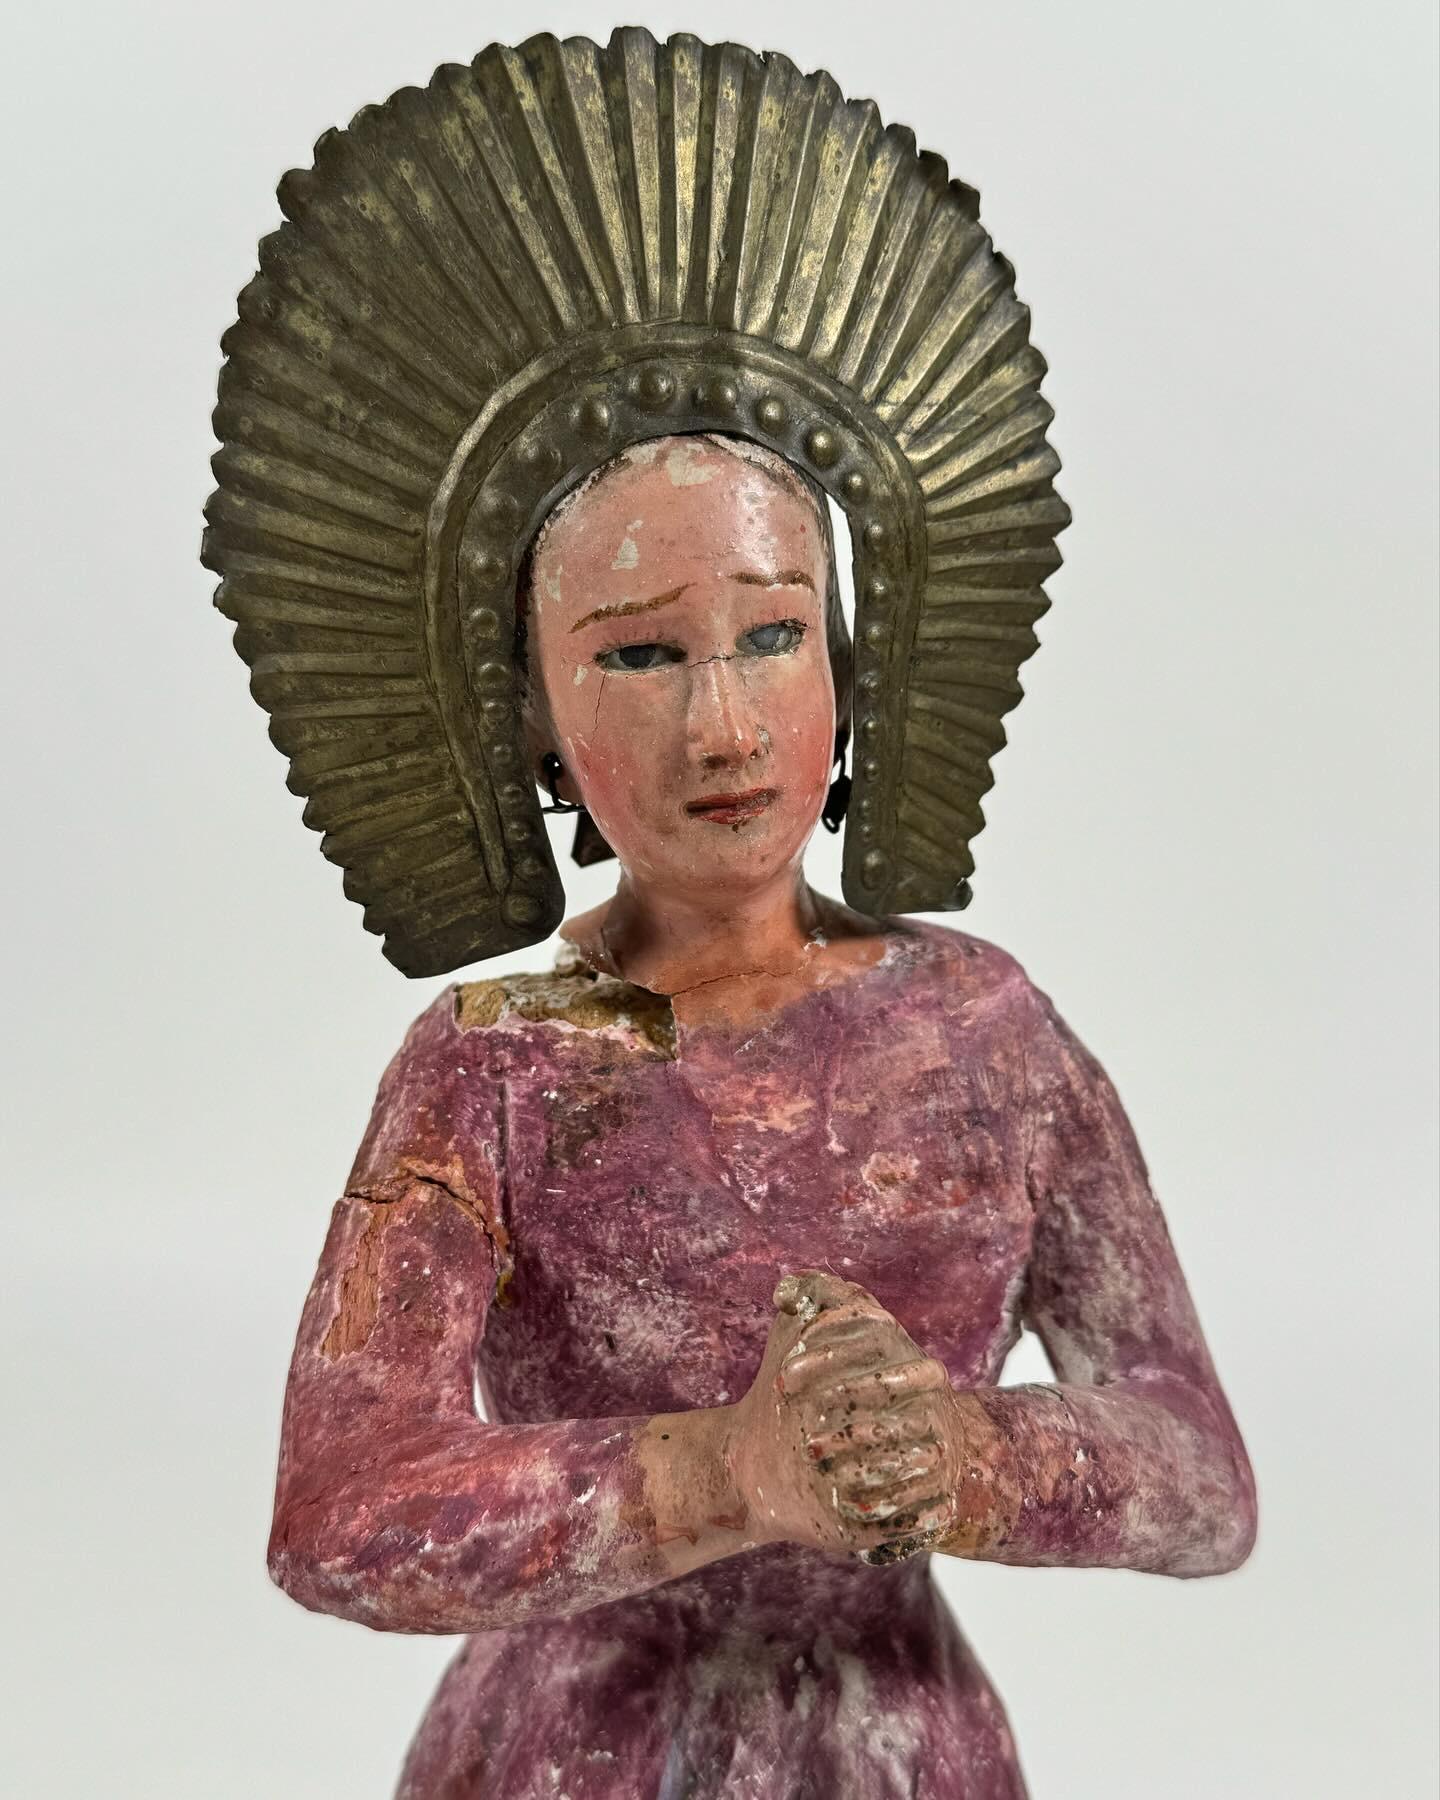 Vintage Santos / Saint most likely of Mexican origin, age most likely 19th Century judging by the patina. Hand carved and painted wood figure with metal halo and earrings along with glass eyes. Much patina to the sculpture which many find appealing